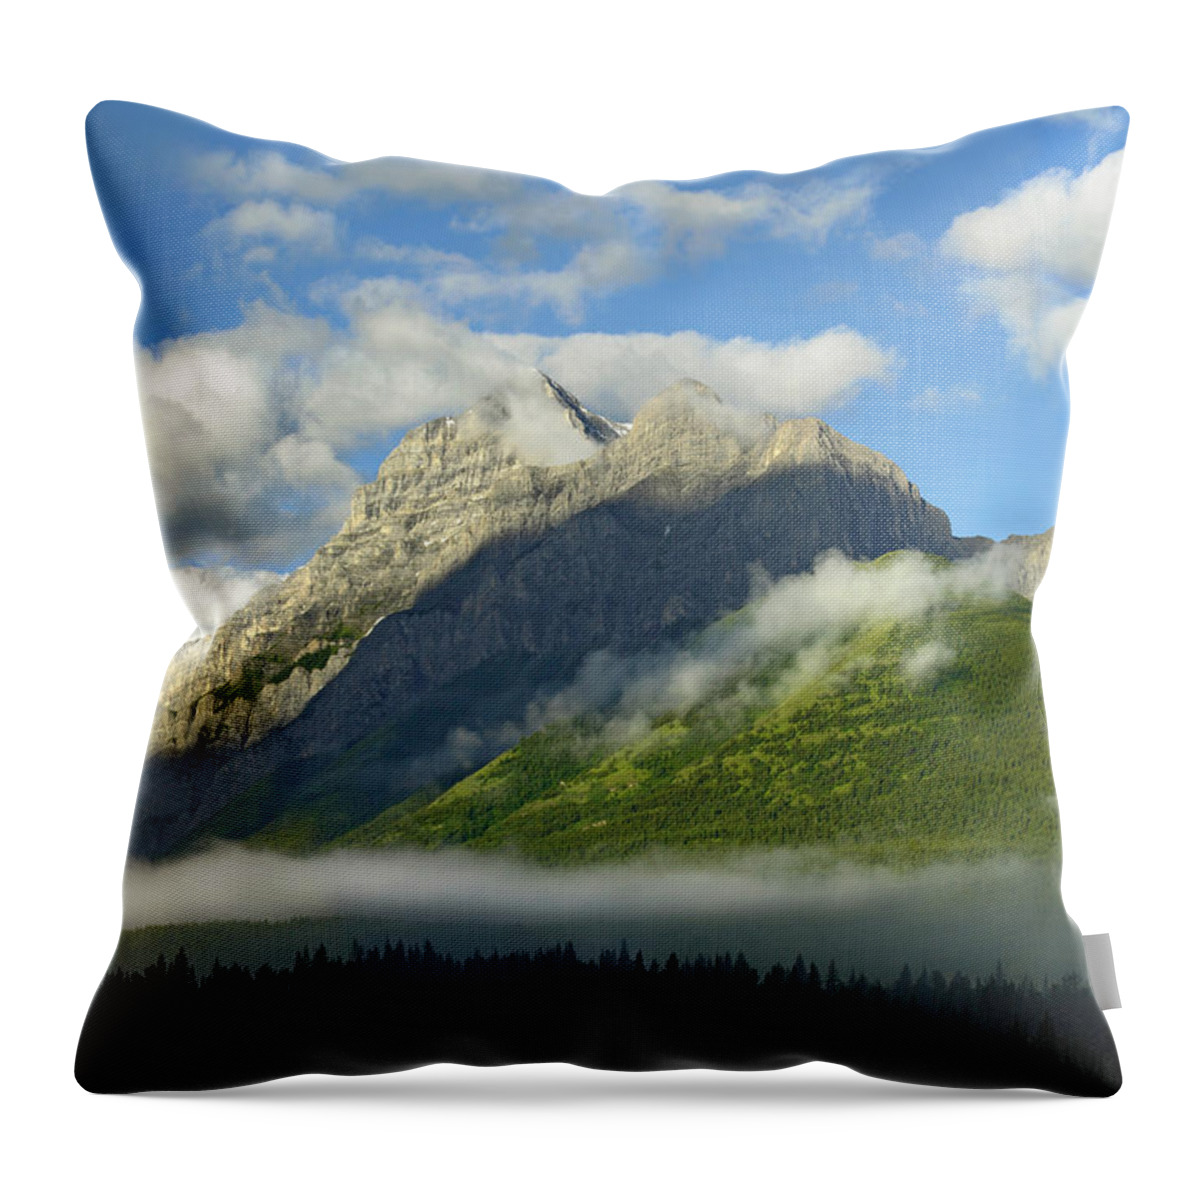 00175313 Throw Pillow featuring the photograph Mt Kidd With Slopes Covered by Tim Fitzharris